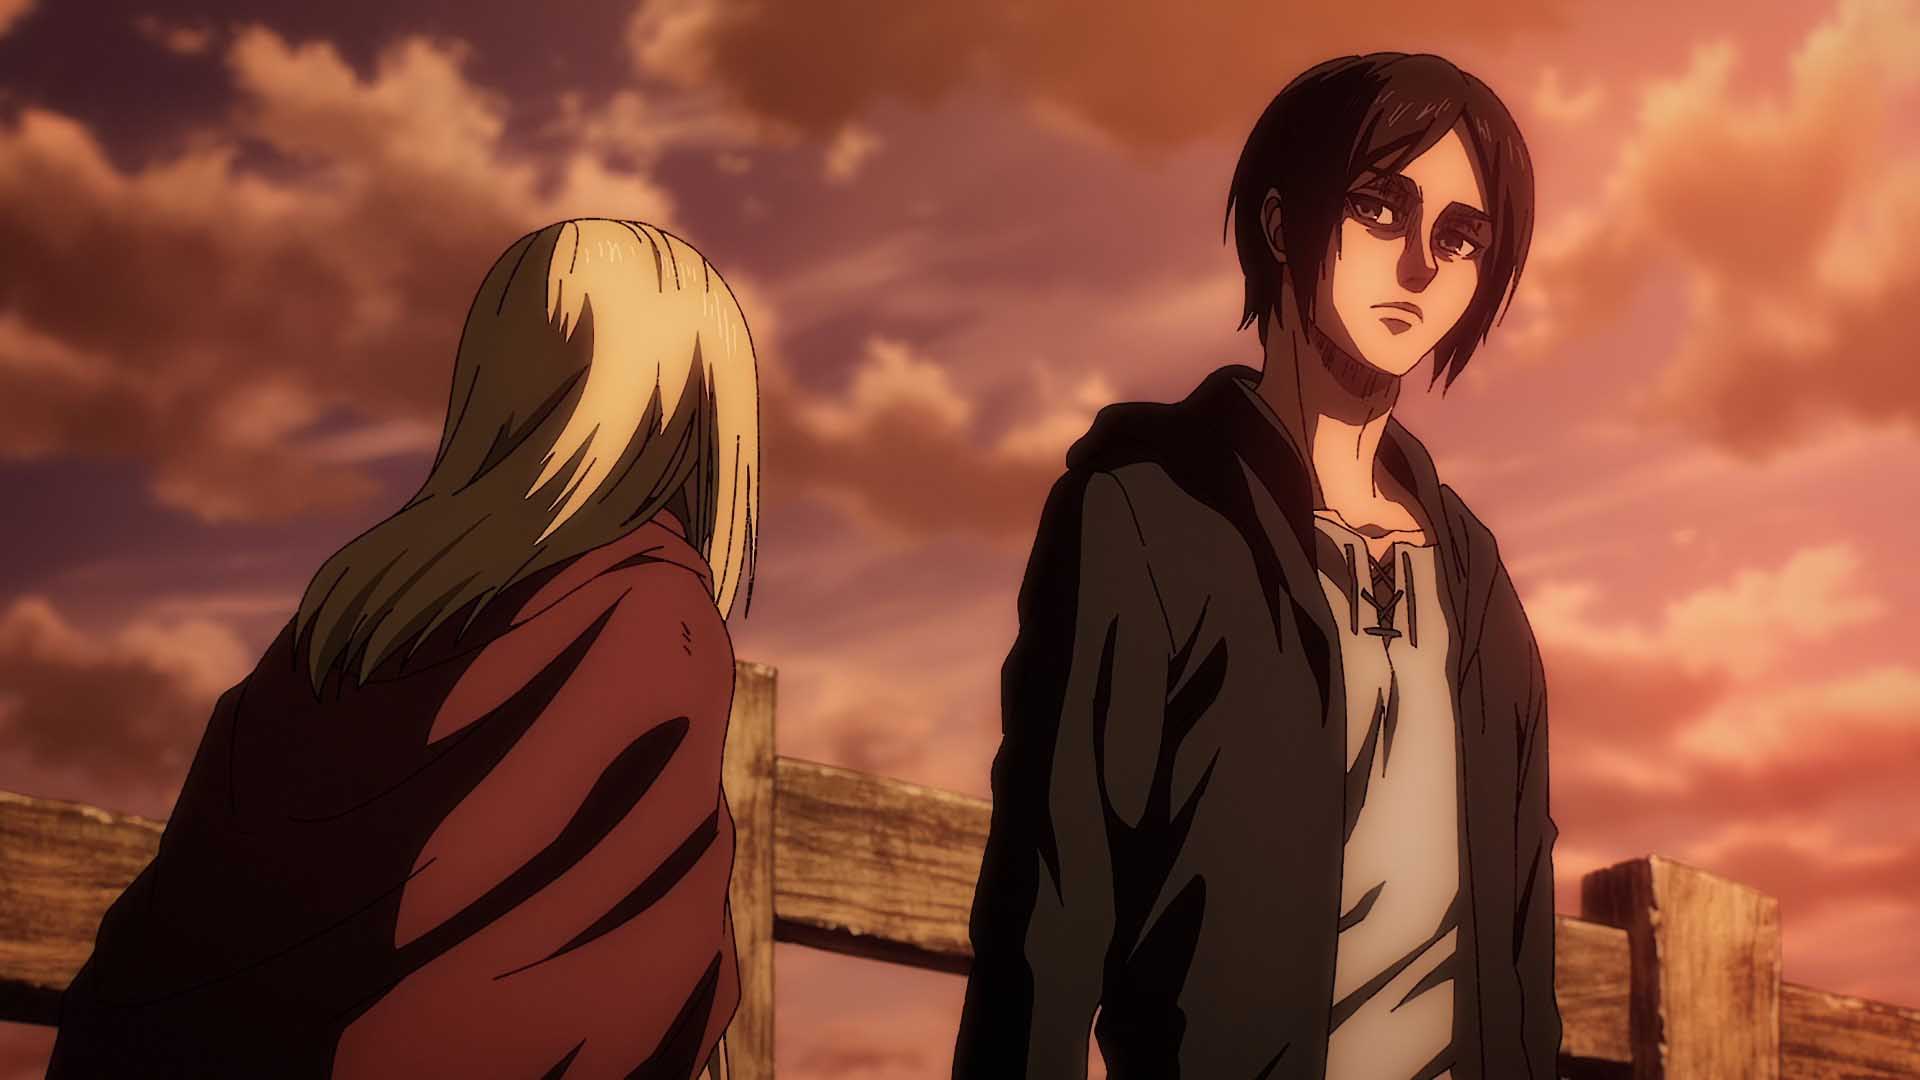 Attack on Titan Ending: Will the Anime Have an Original Ending?